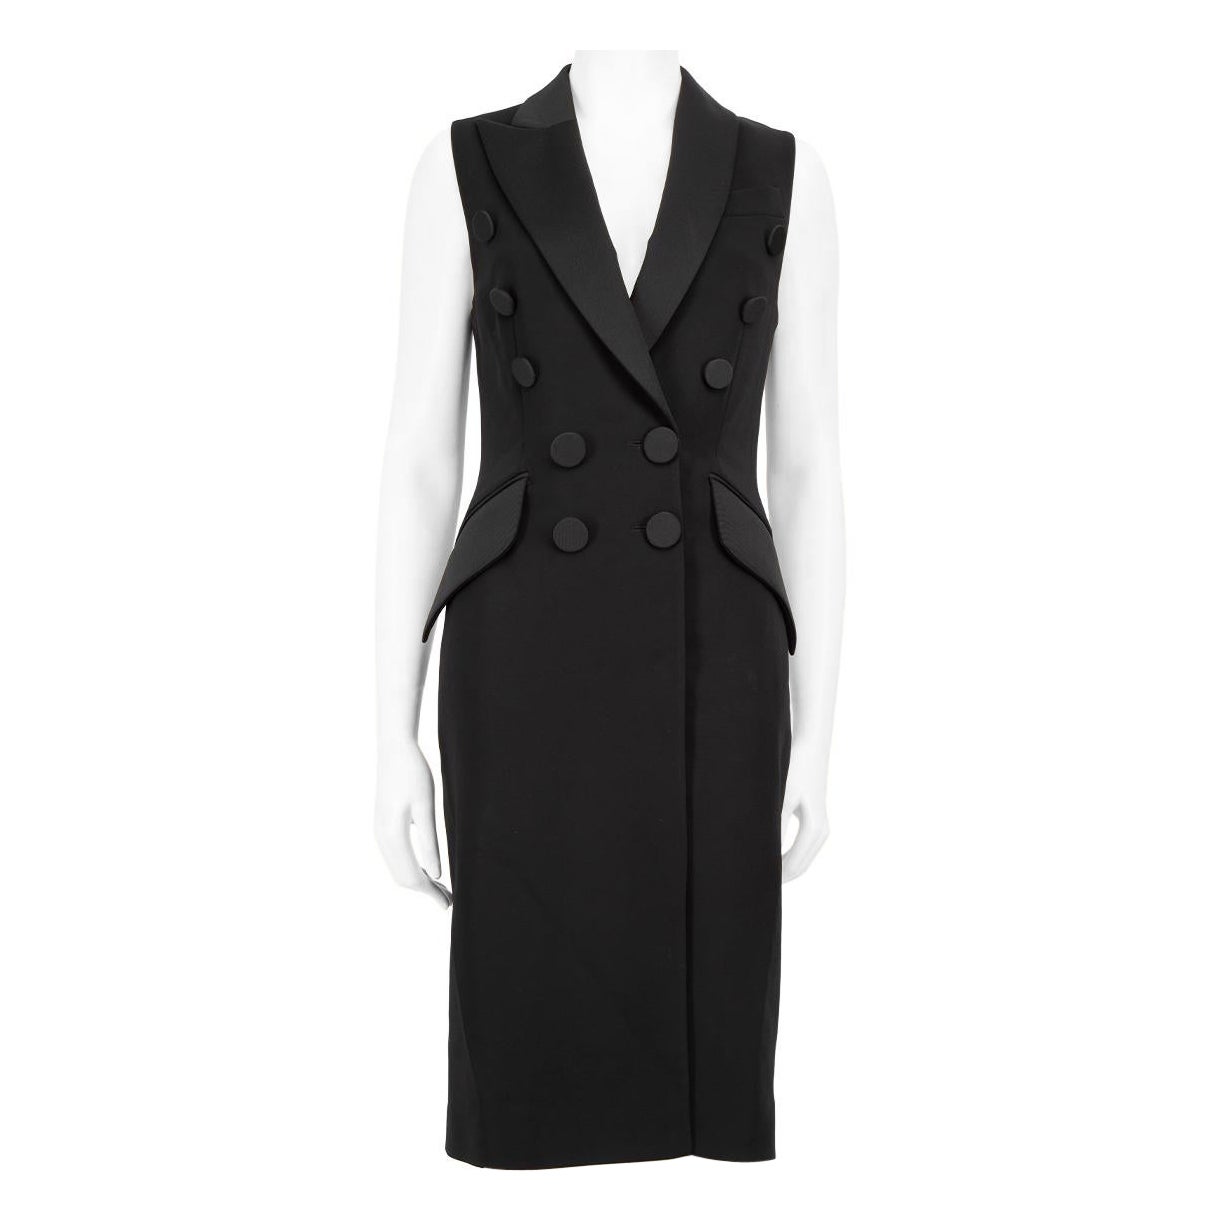 Moschino Moschino Couture! Black Double Breasted Sleeveless Waistcoat Size S For Sale